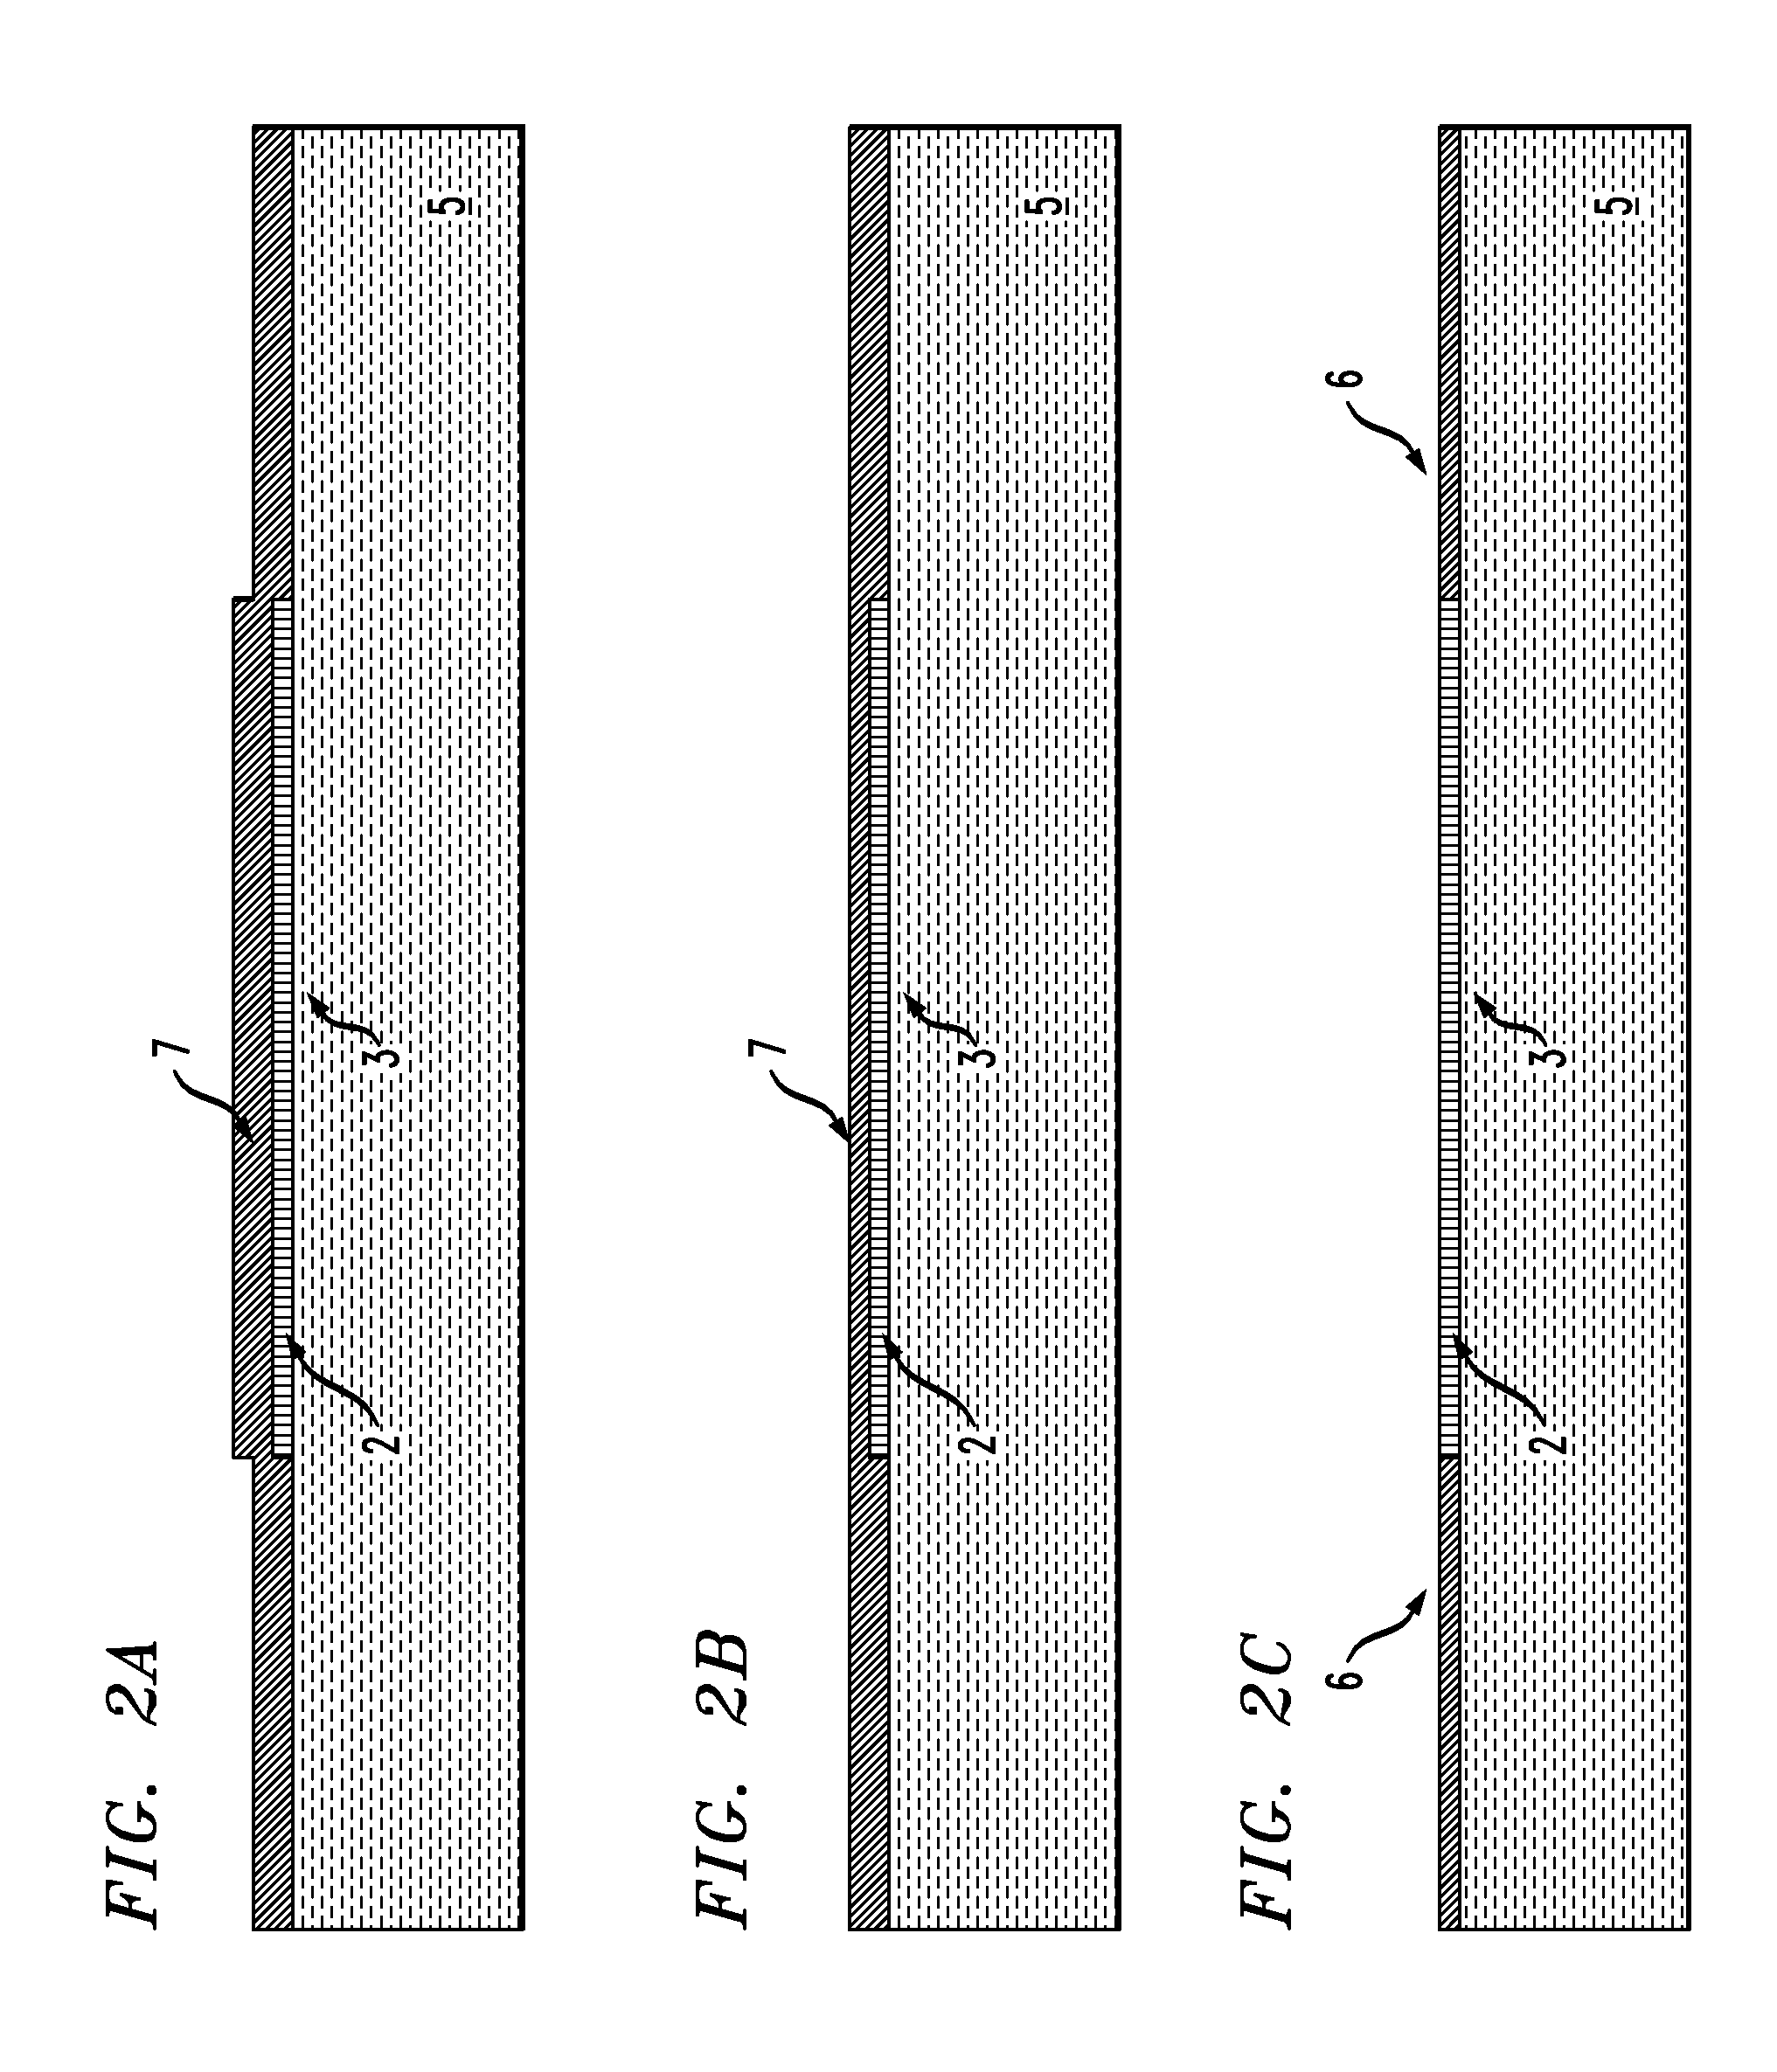 Methods of fabricating a membrane with improved mechanical integrity